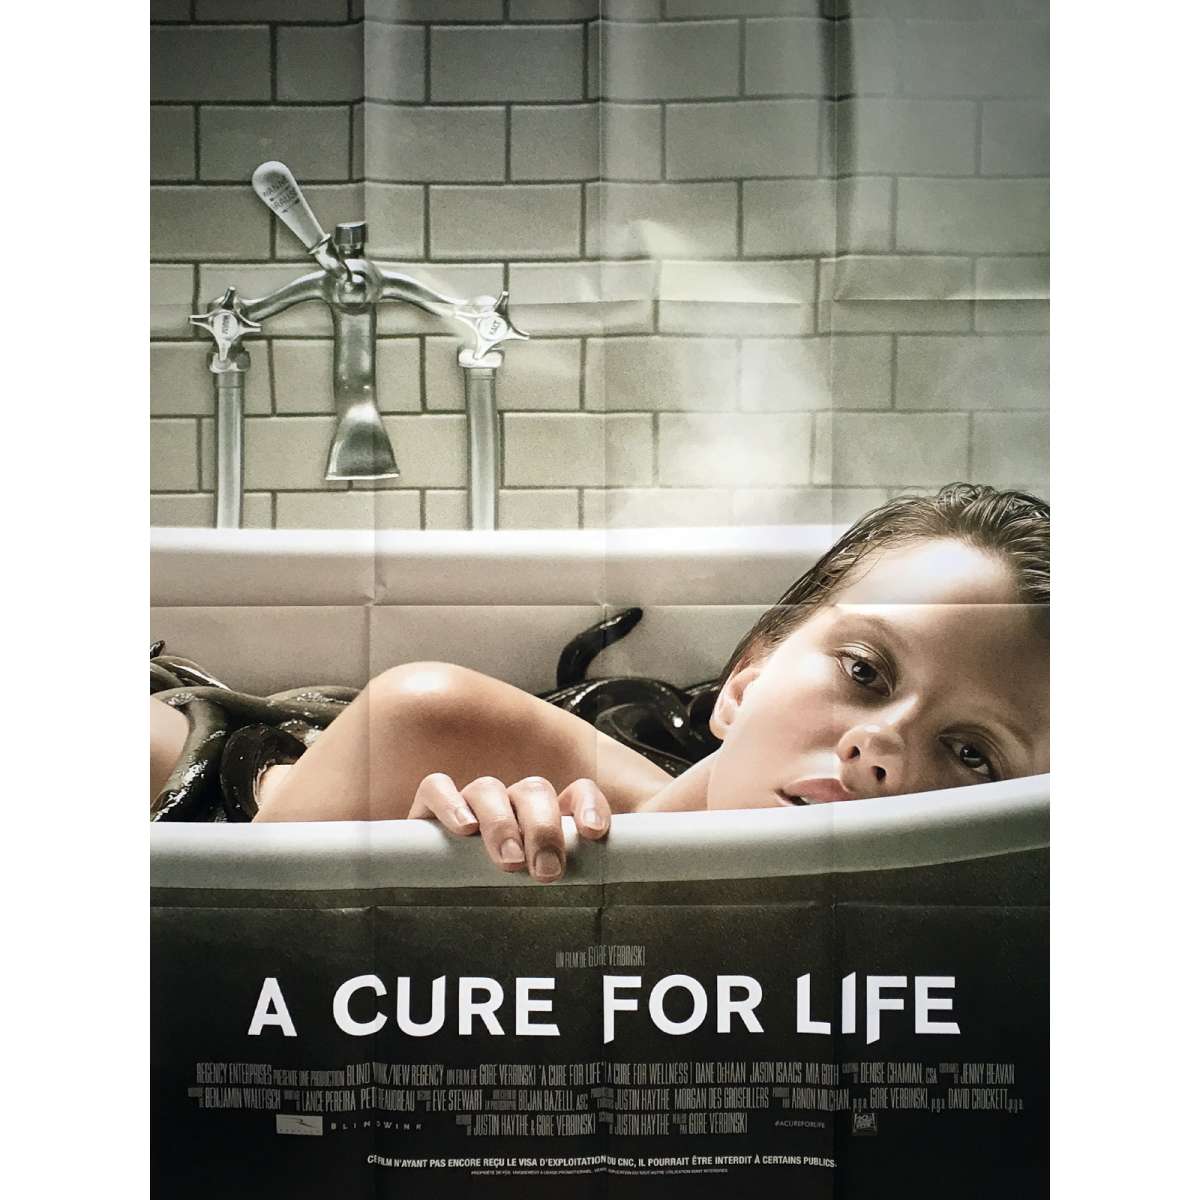 Le meilleur film cinéma 2017 - Page 13 A-cure-for-wellness-movie-poster-47x63-in-2017-gore-verbinski-jason-isaacs